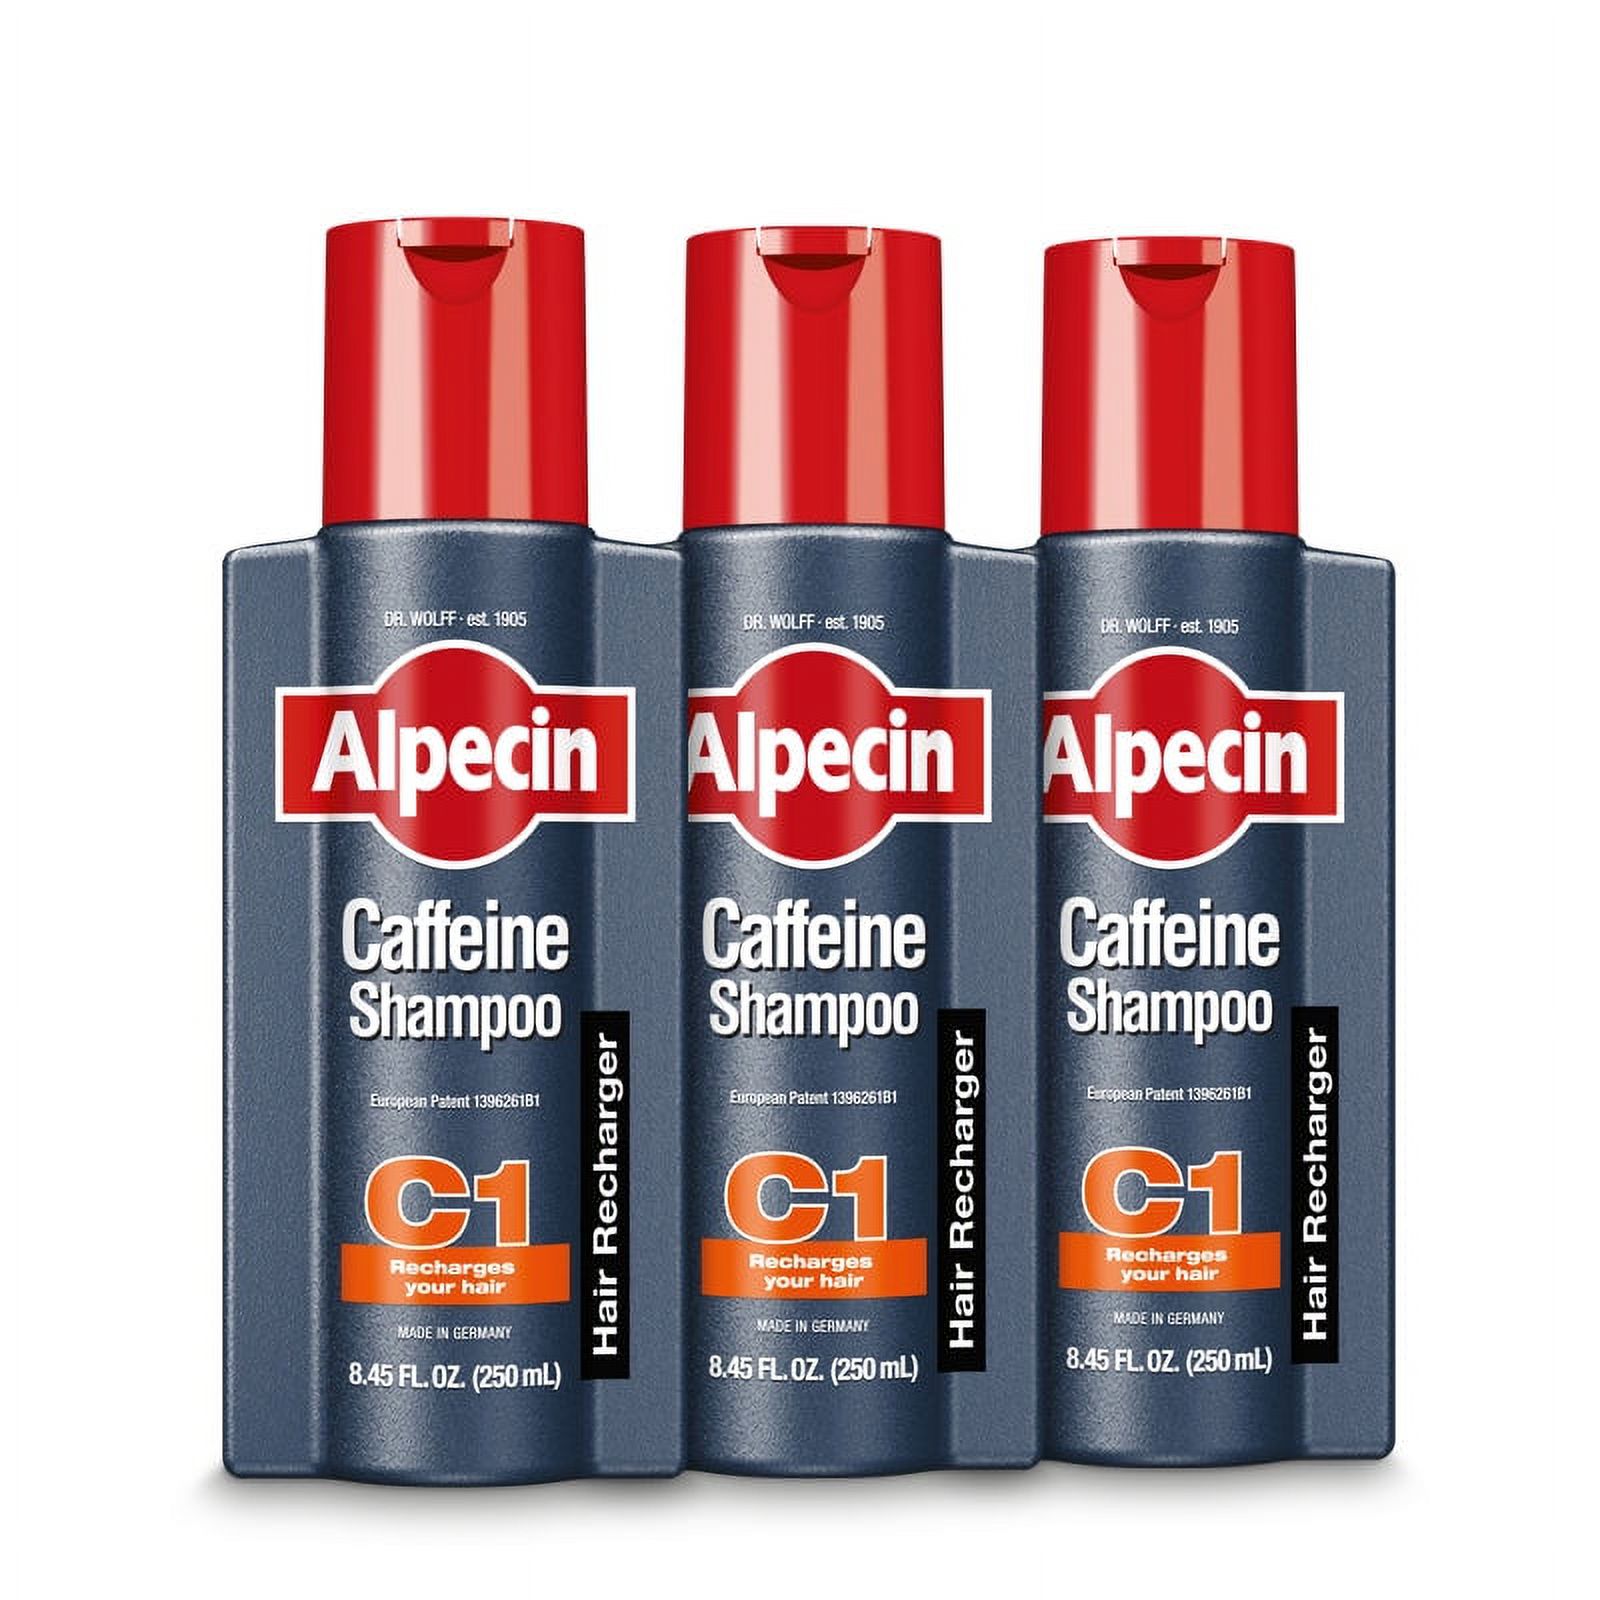 Alpecin Caffeine Shampoo C1 - Cleanses the Scalp to Promote Natural Hair Growth - image 1 of 5